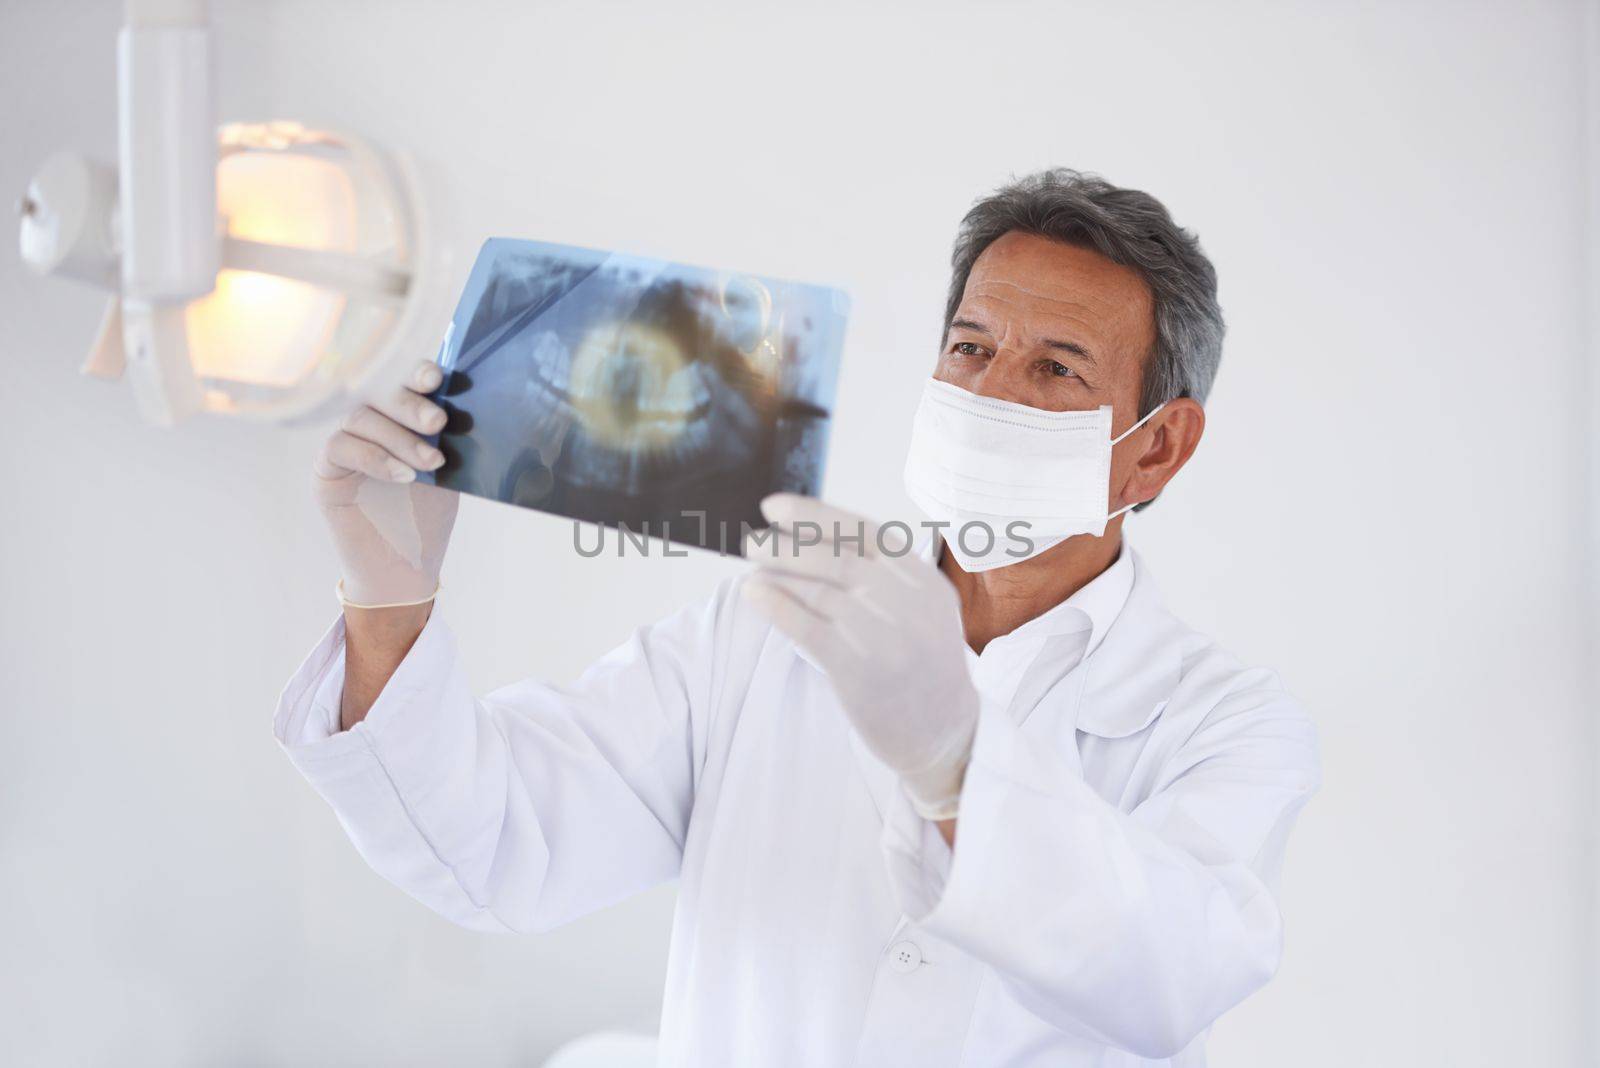 Getting a closer look. a dentist looking at an xray